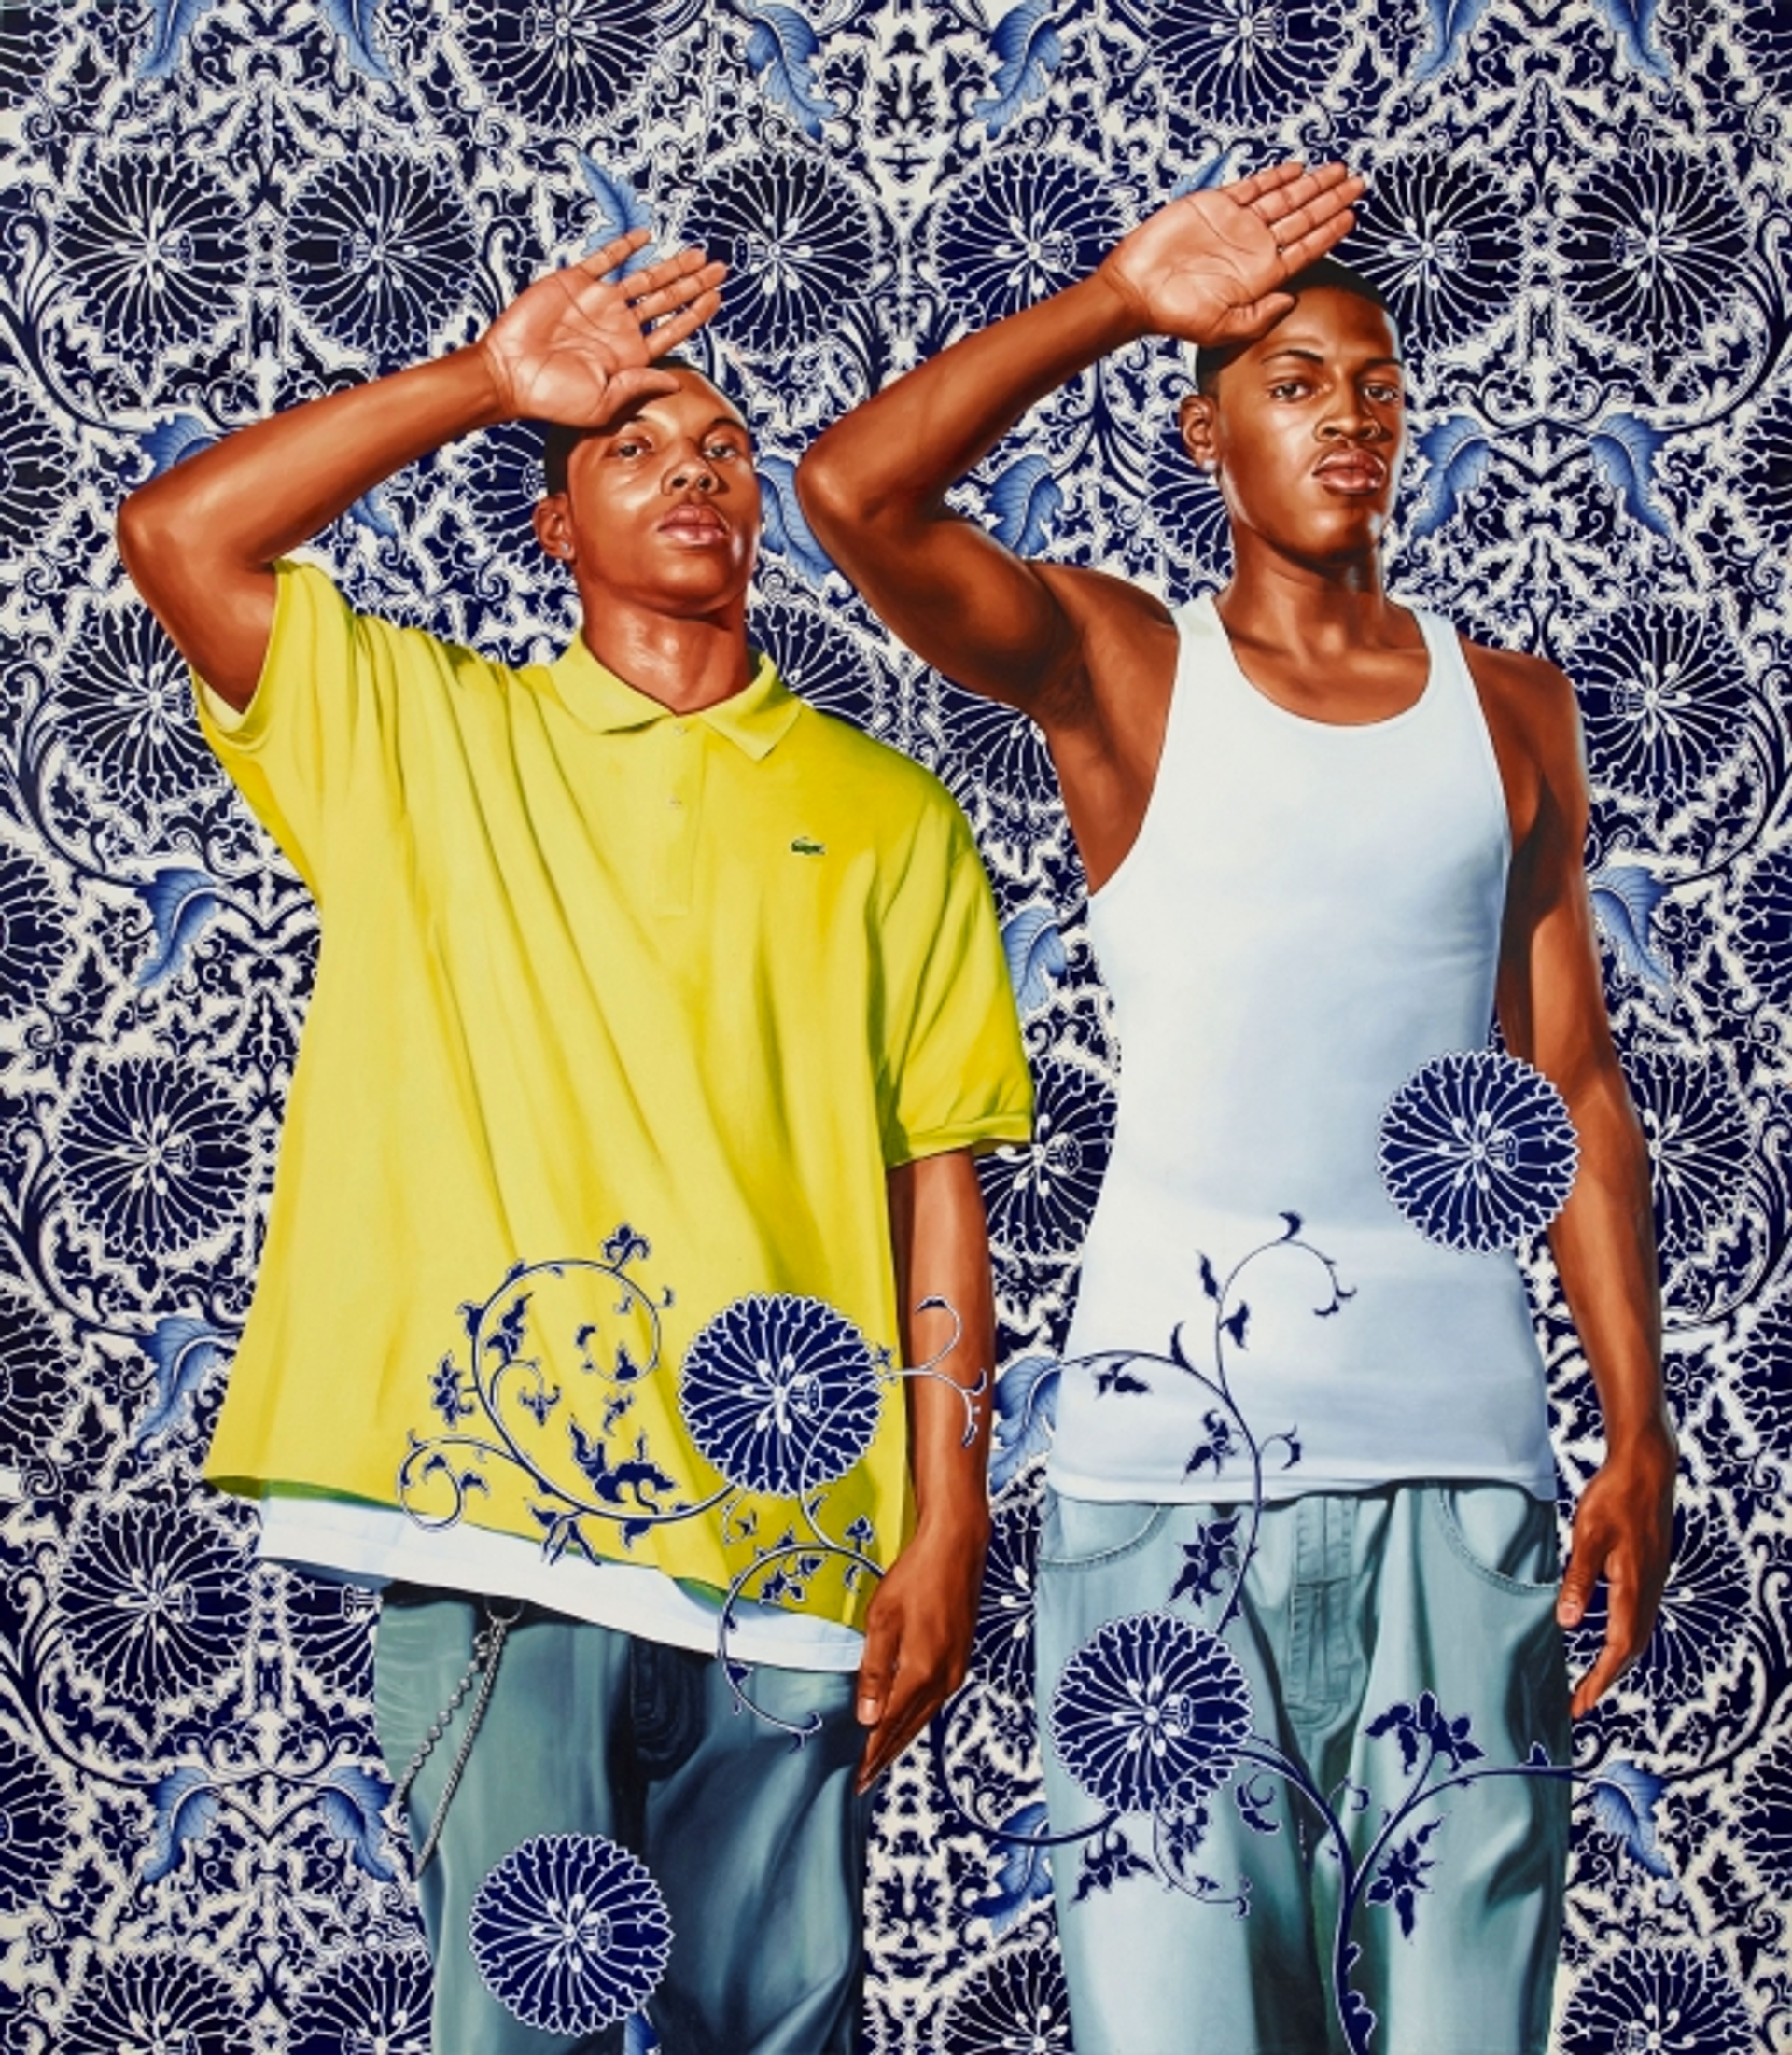 Kehinde Wiley’s Two Heroic Sisters of the Grassland. Two black men standing beside one another with one hand raised open on their forehead, and the other hand on the side of their bodies. One wears a yellow shirt, the other  white tank top in front of an ornate blue patterned background.